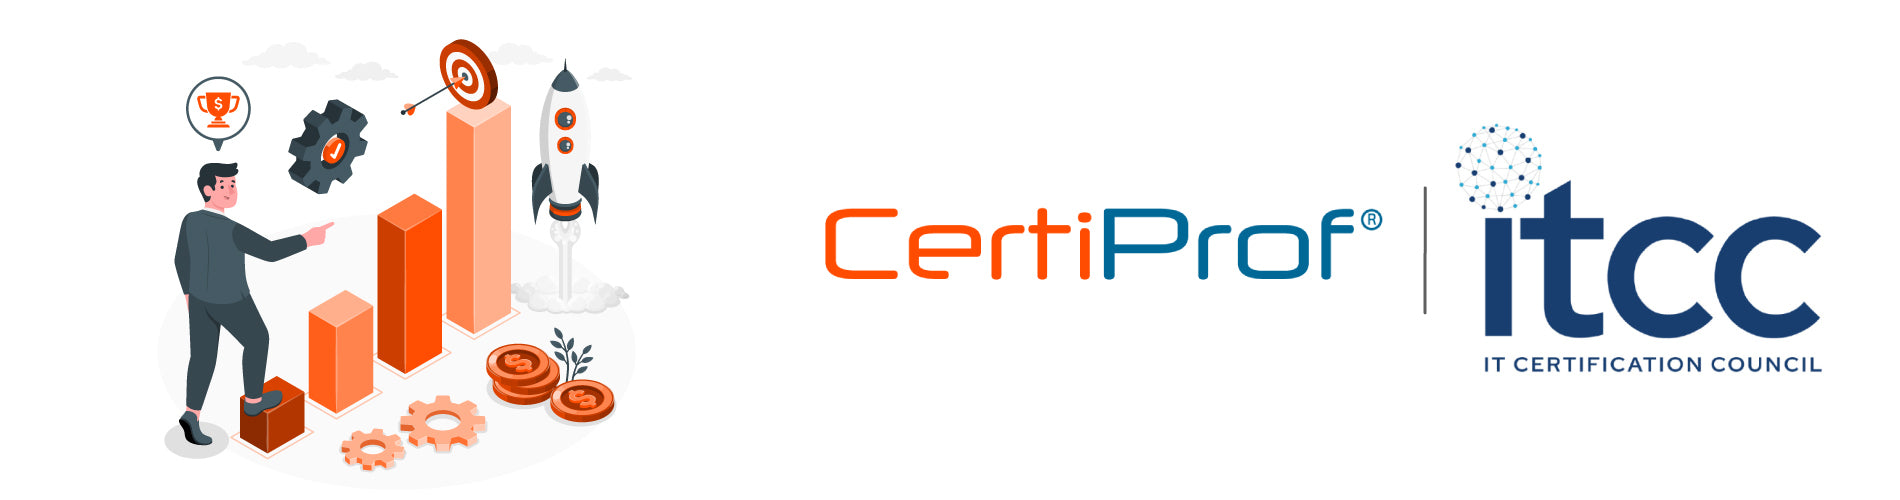 CertiProf joins the ITCC - IT Certification Council